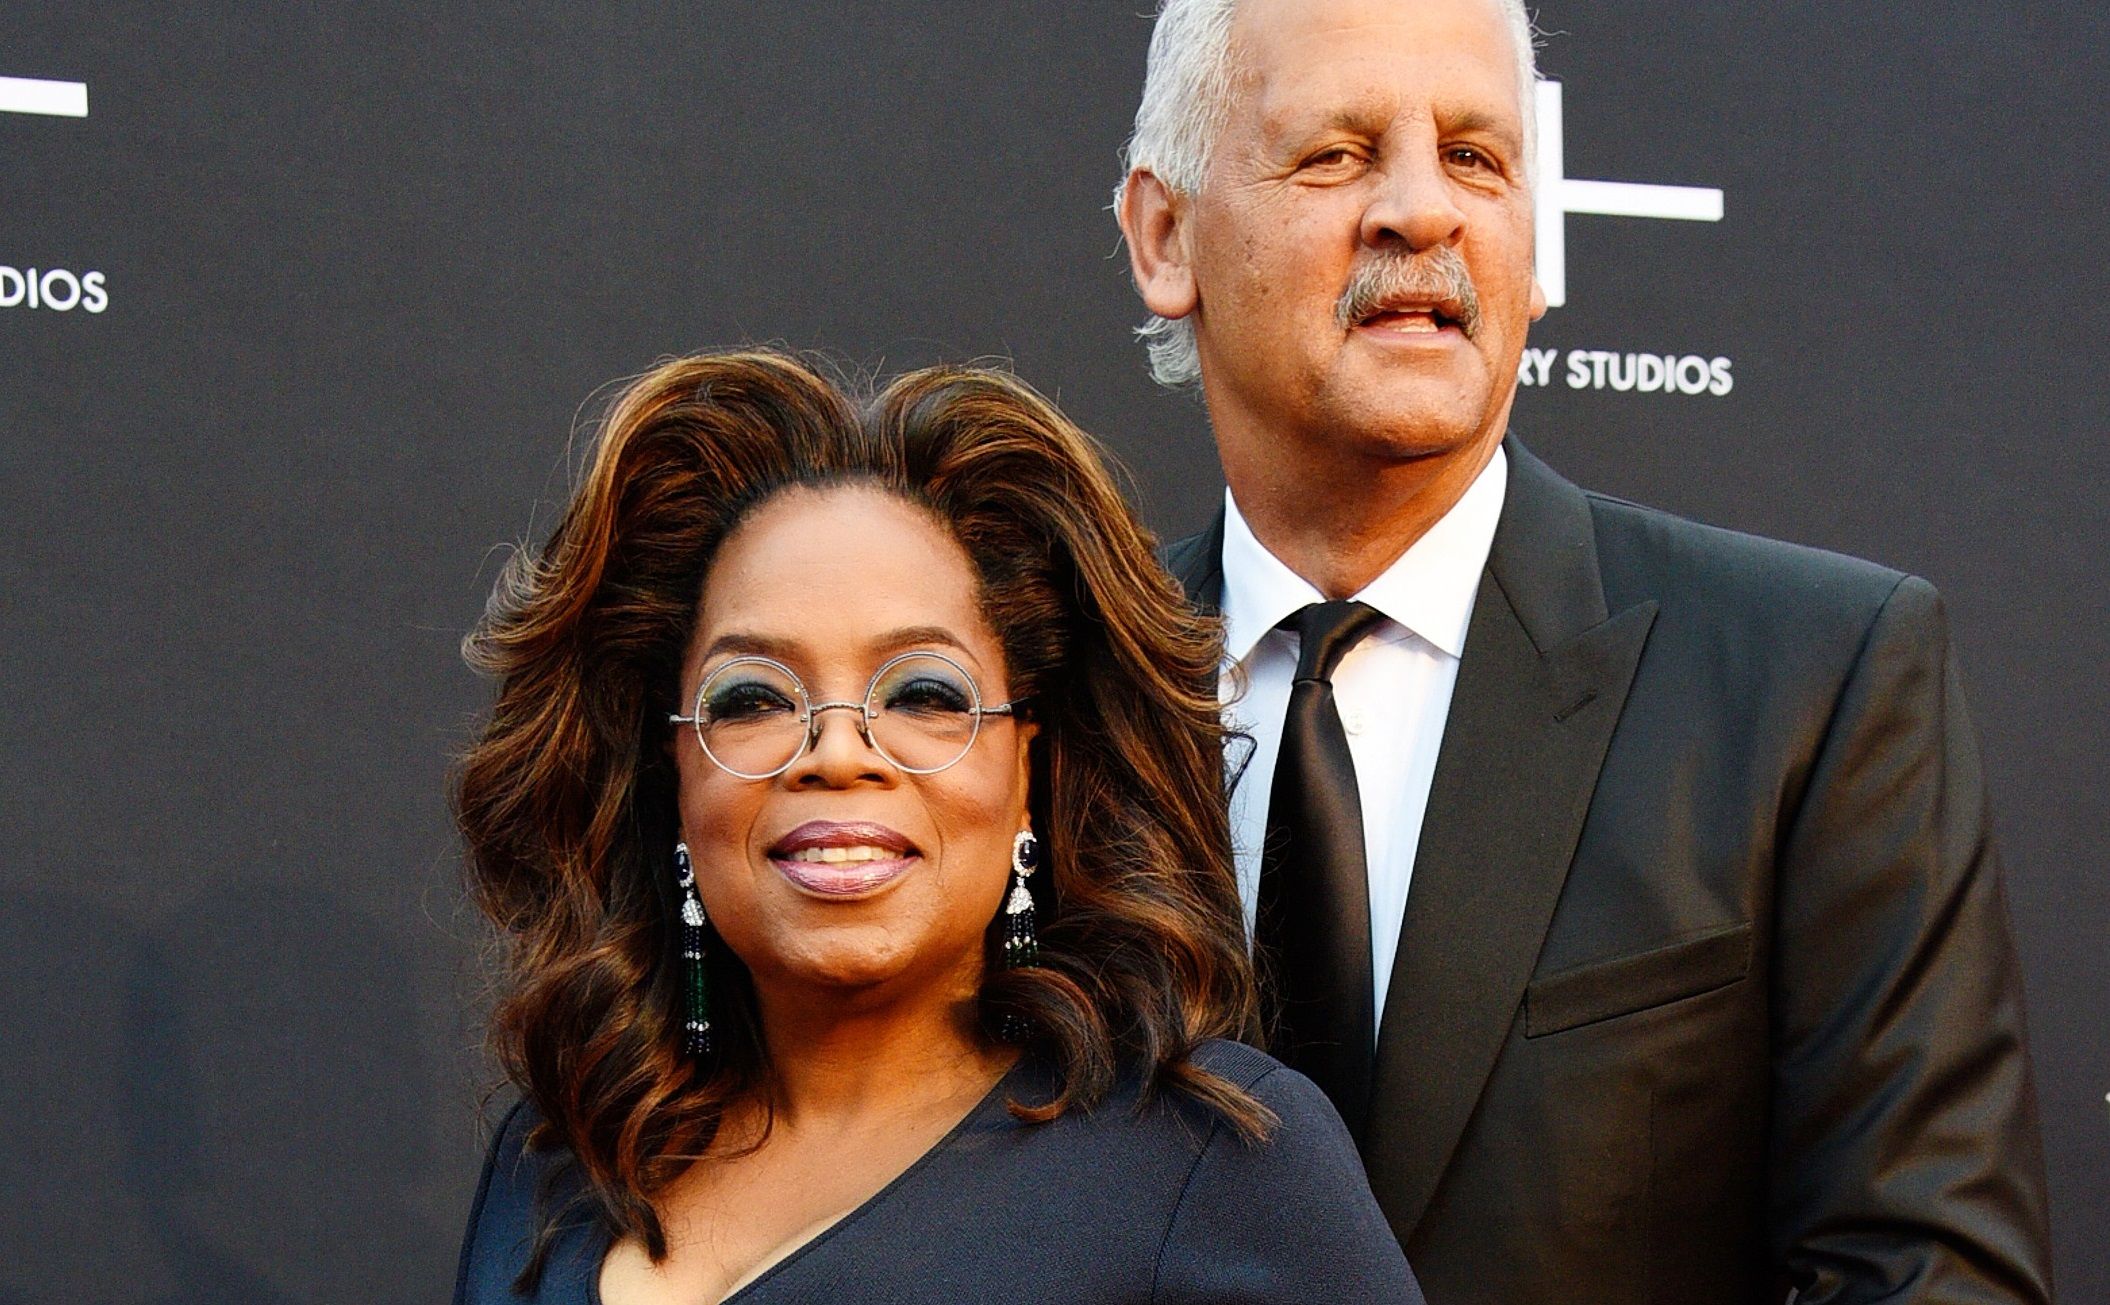 Oprah stands by decision not to have children